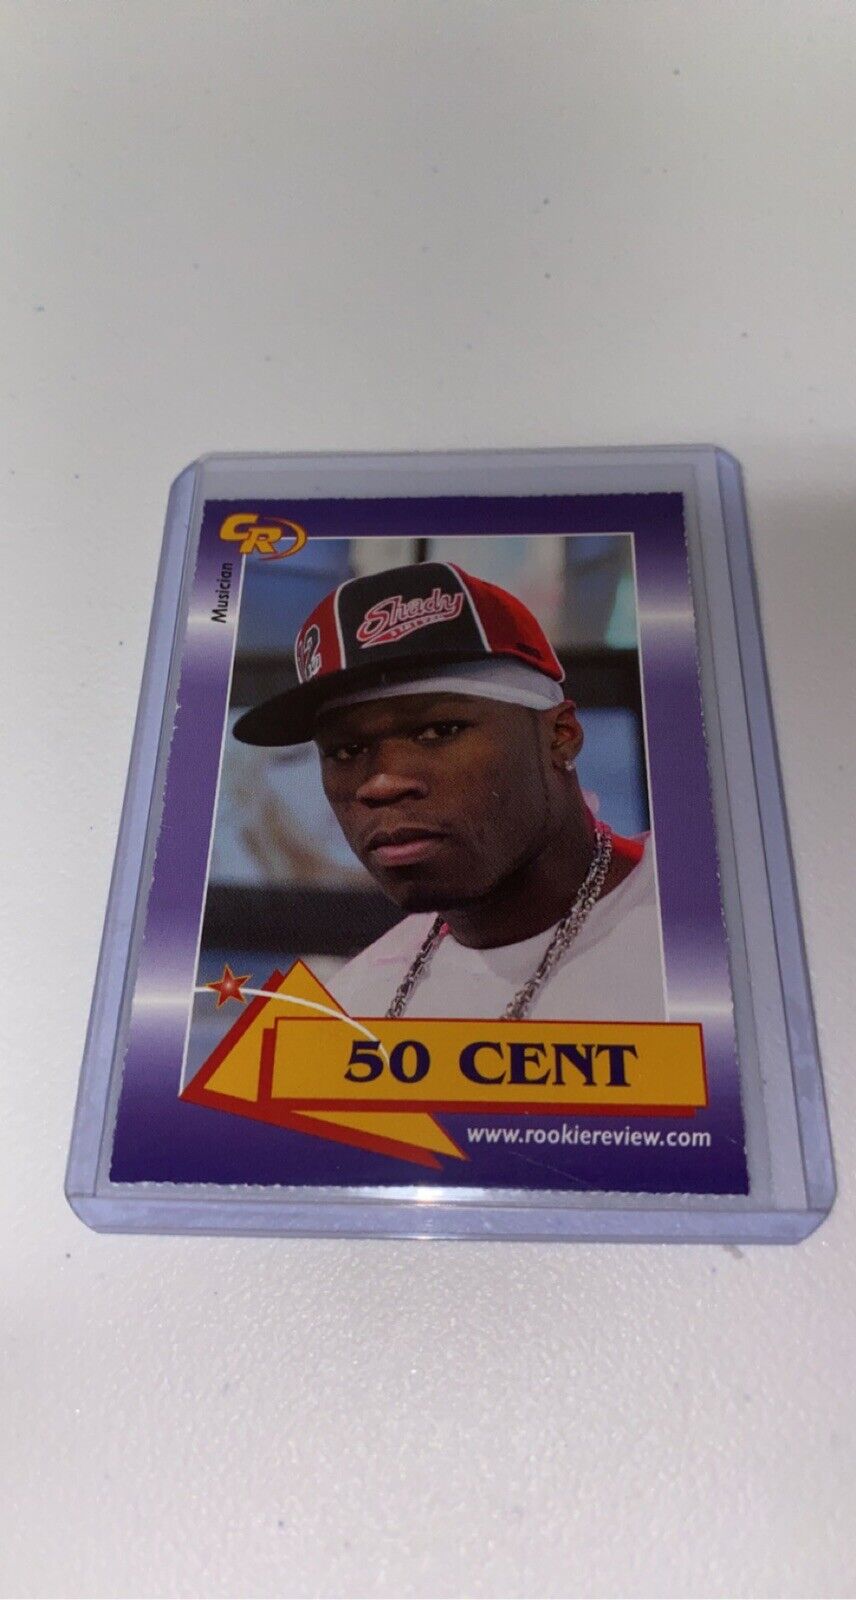 2003 Celebrity Review Rookie Review 50 CENT Rapper Musician Card #10